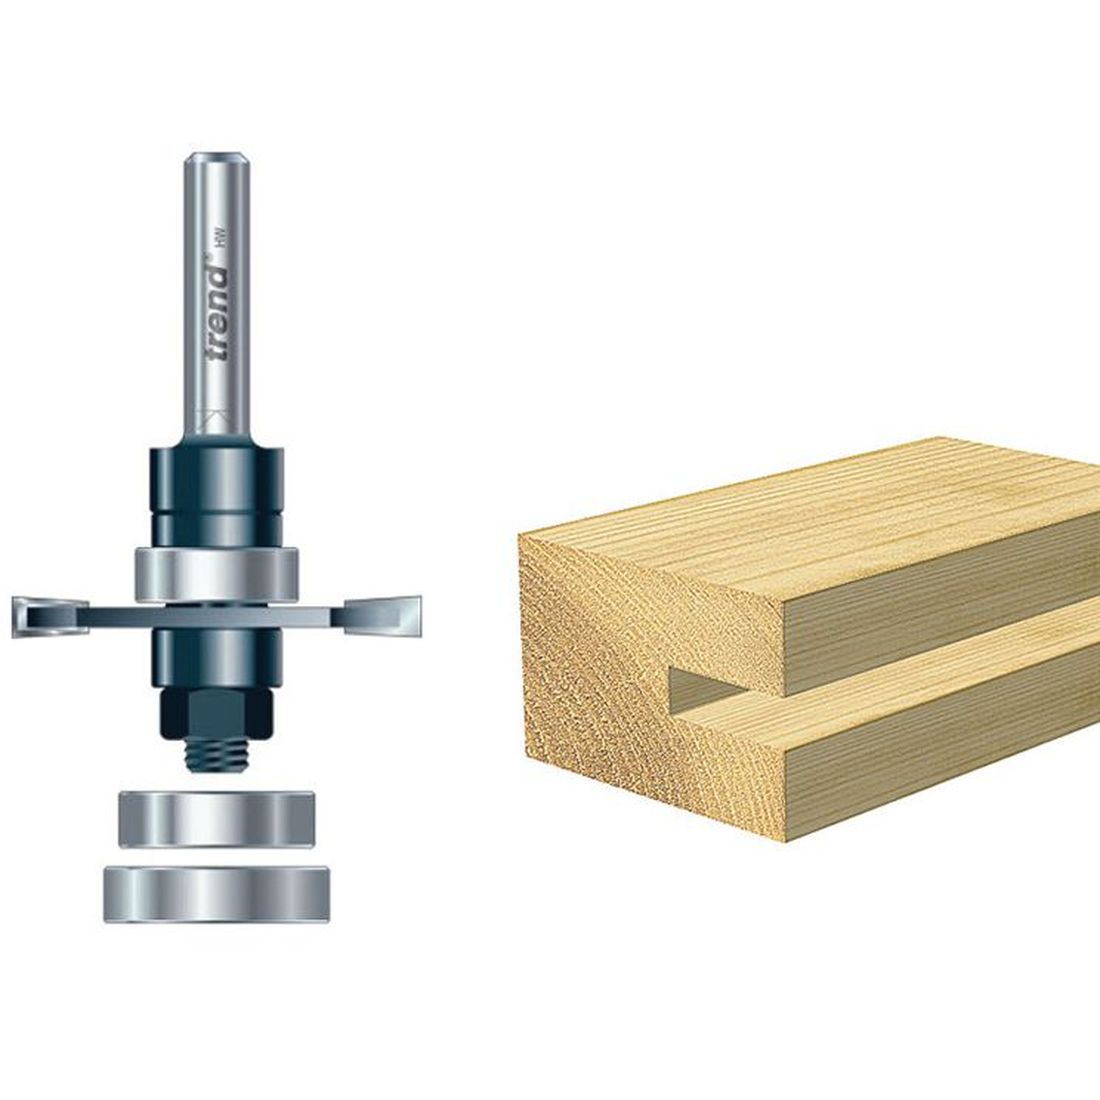 Trend 342 x 1/2 TCT Bearing Guided Biscuit Jointer 4.0 x 40mm                         